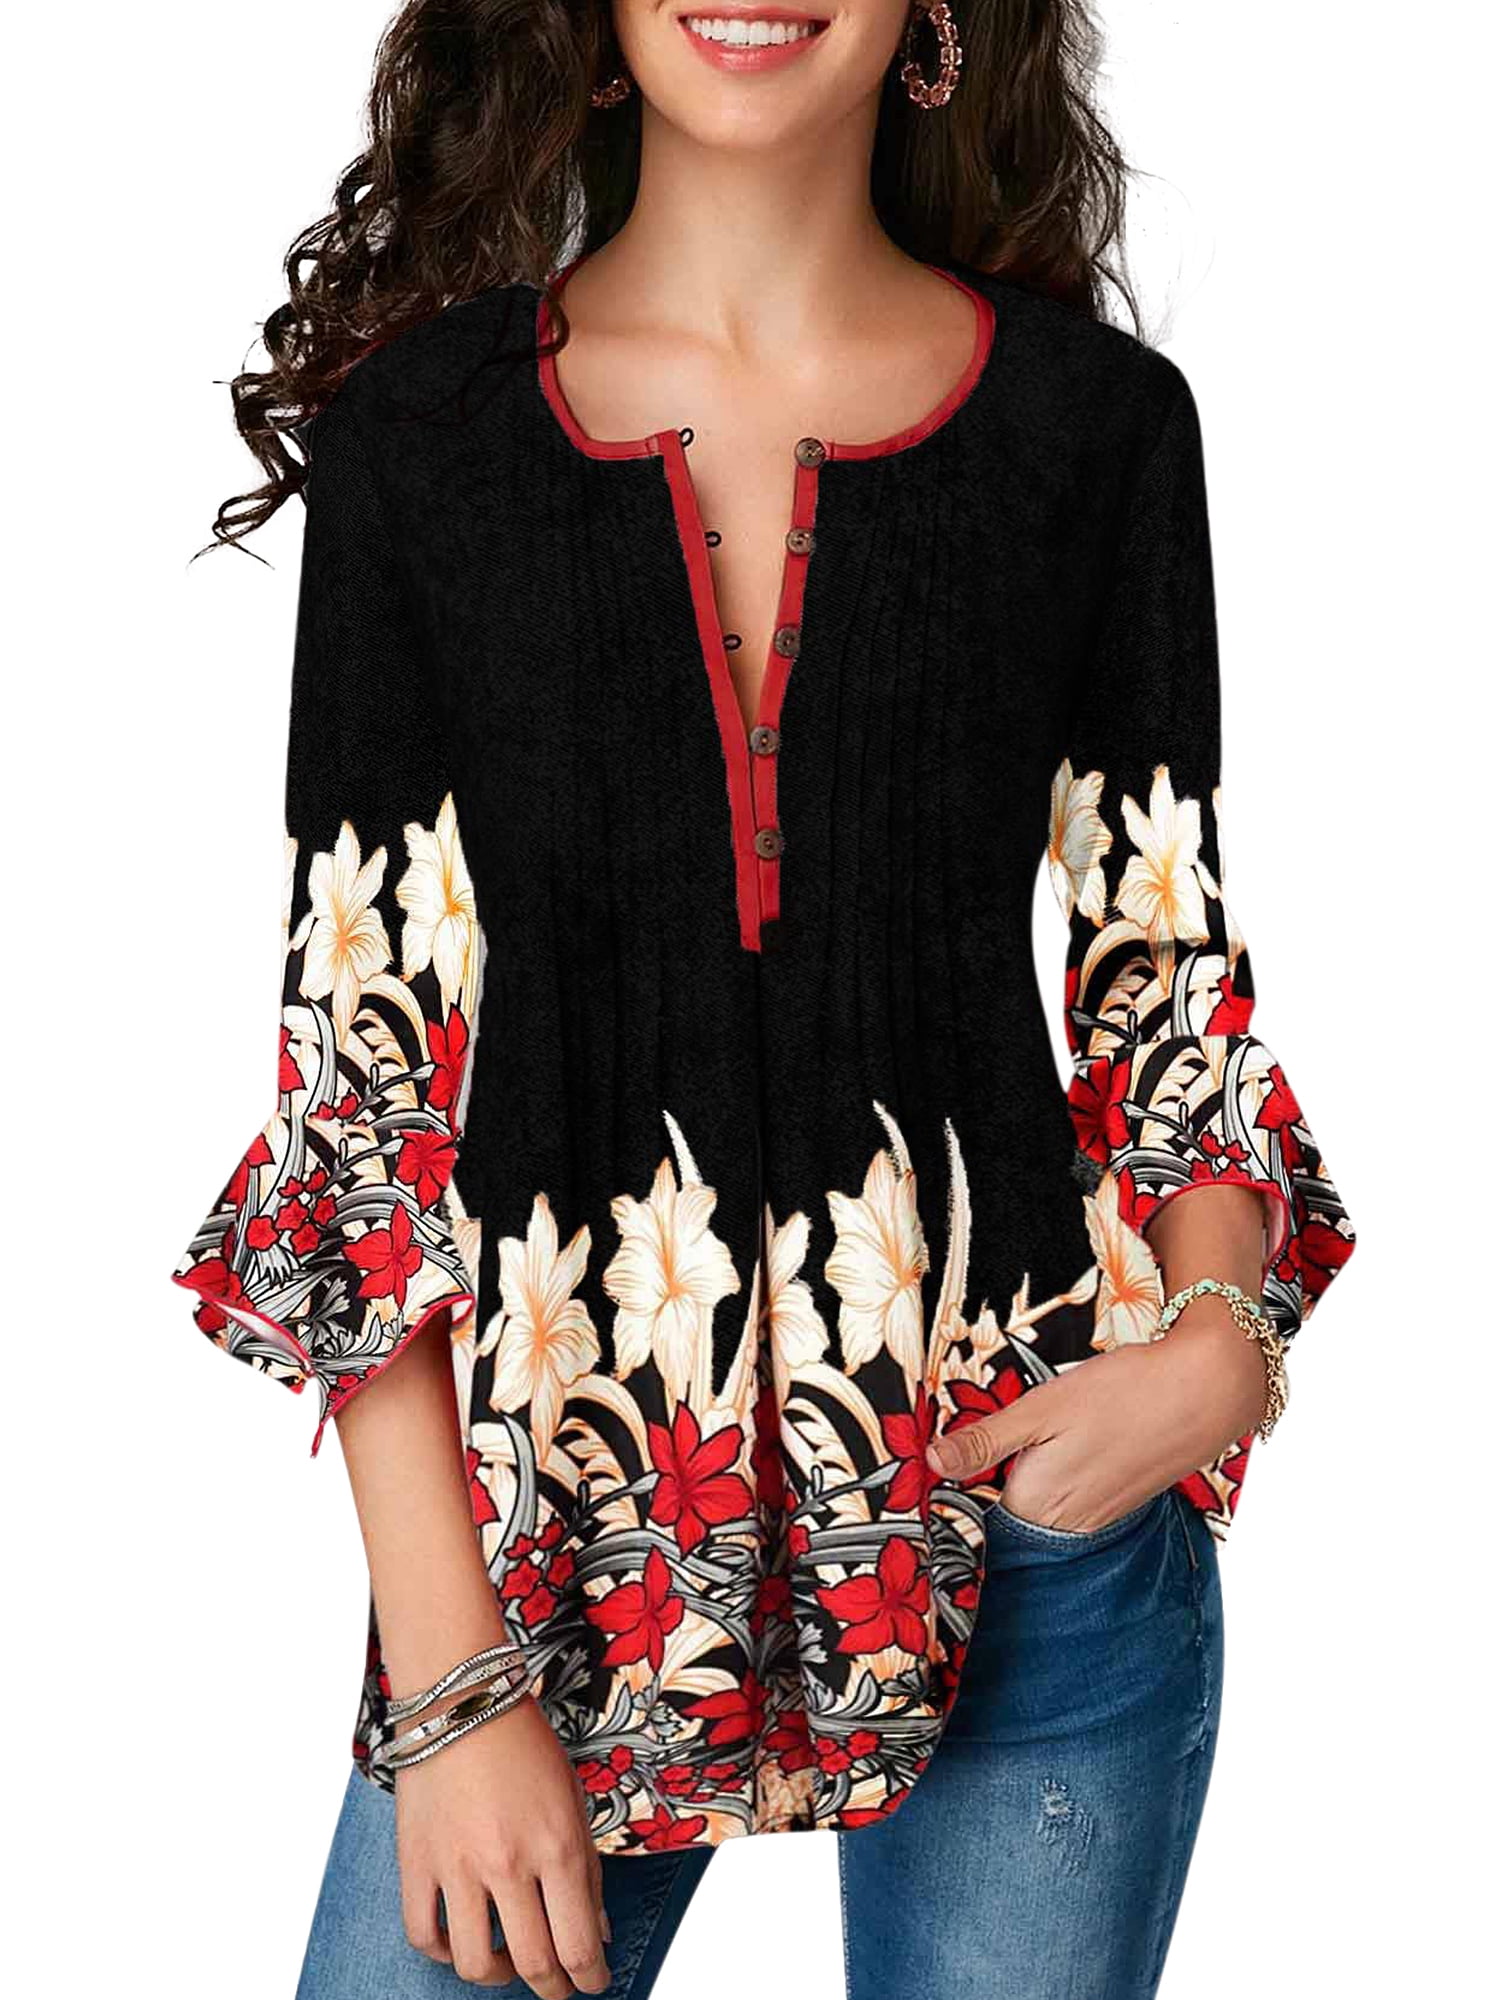 Womens Long Sleeve Paisley Floral Print V-Neck Pleated T-Shirt Tops Casual Tunic Blouse Loose Shirts